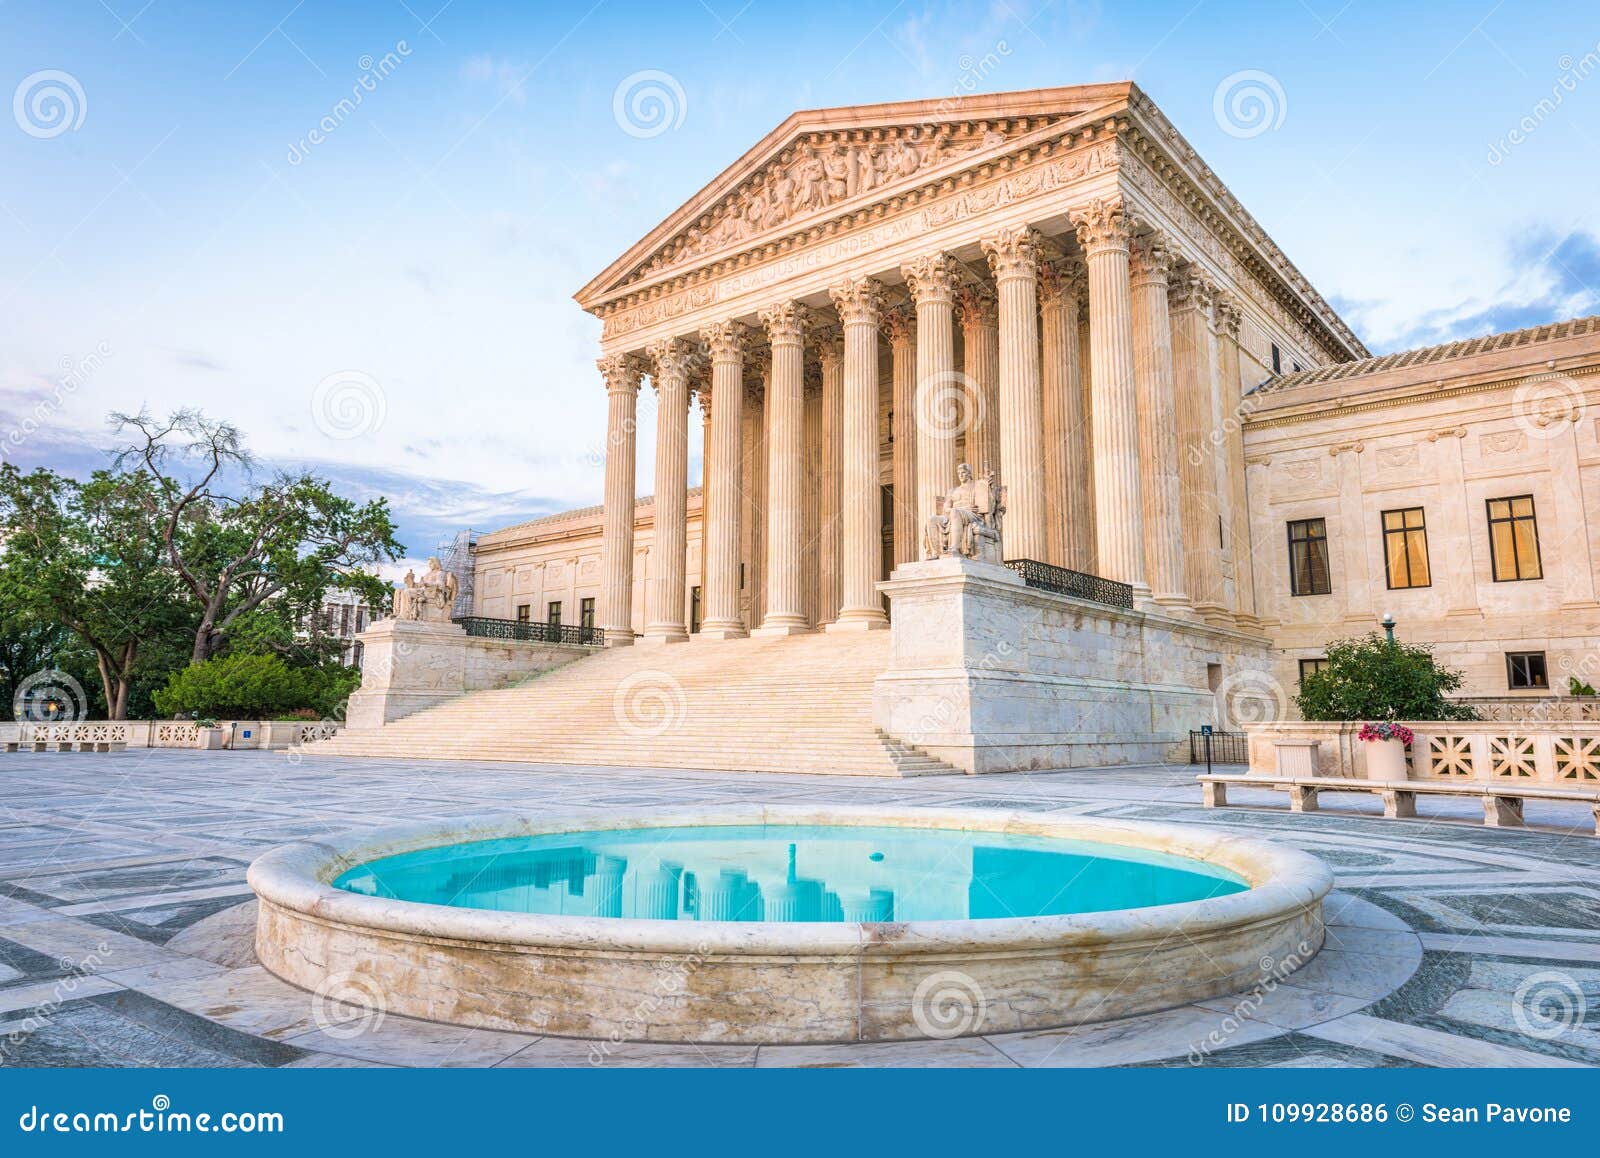 The United States Supreme Court building in Washington DC, United